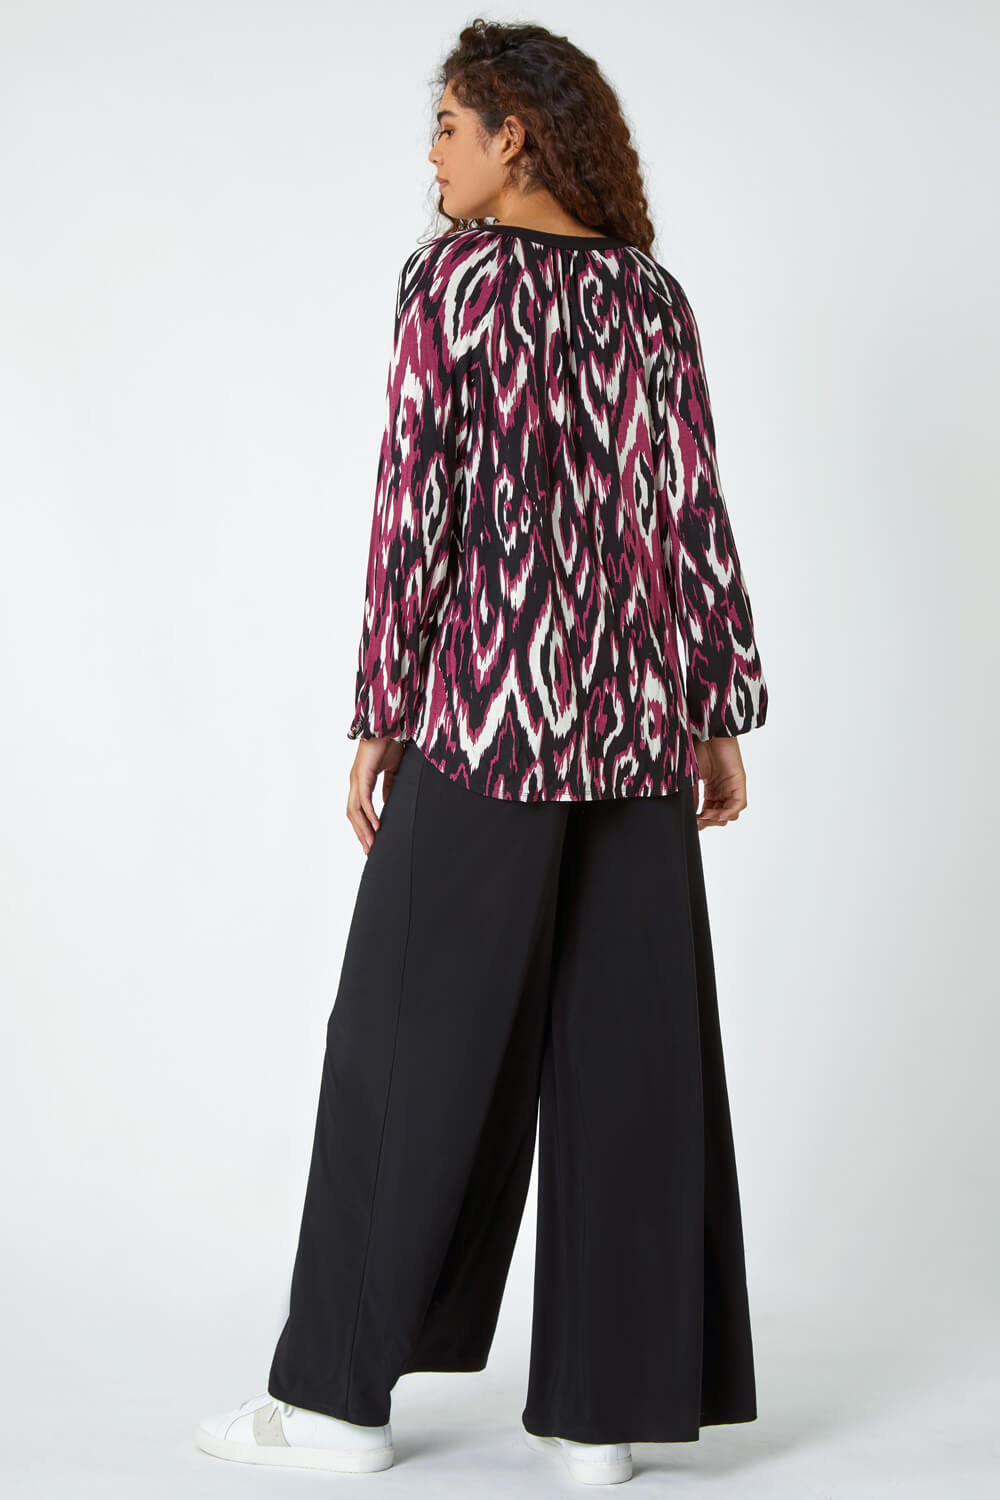 Port Abstract Print Placket Stretch Top , Image 3 of 5